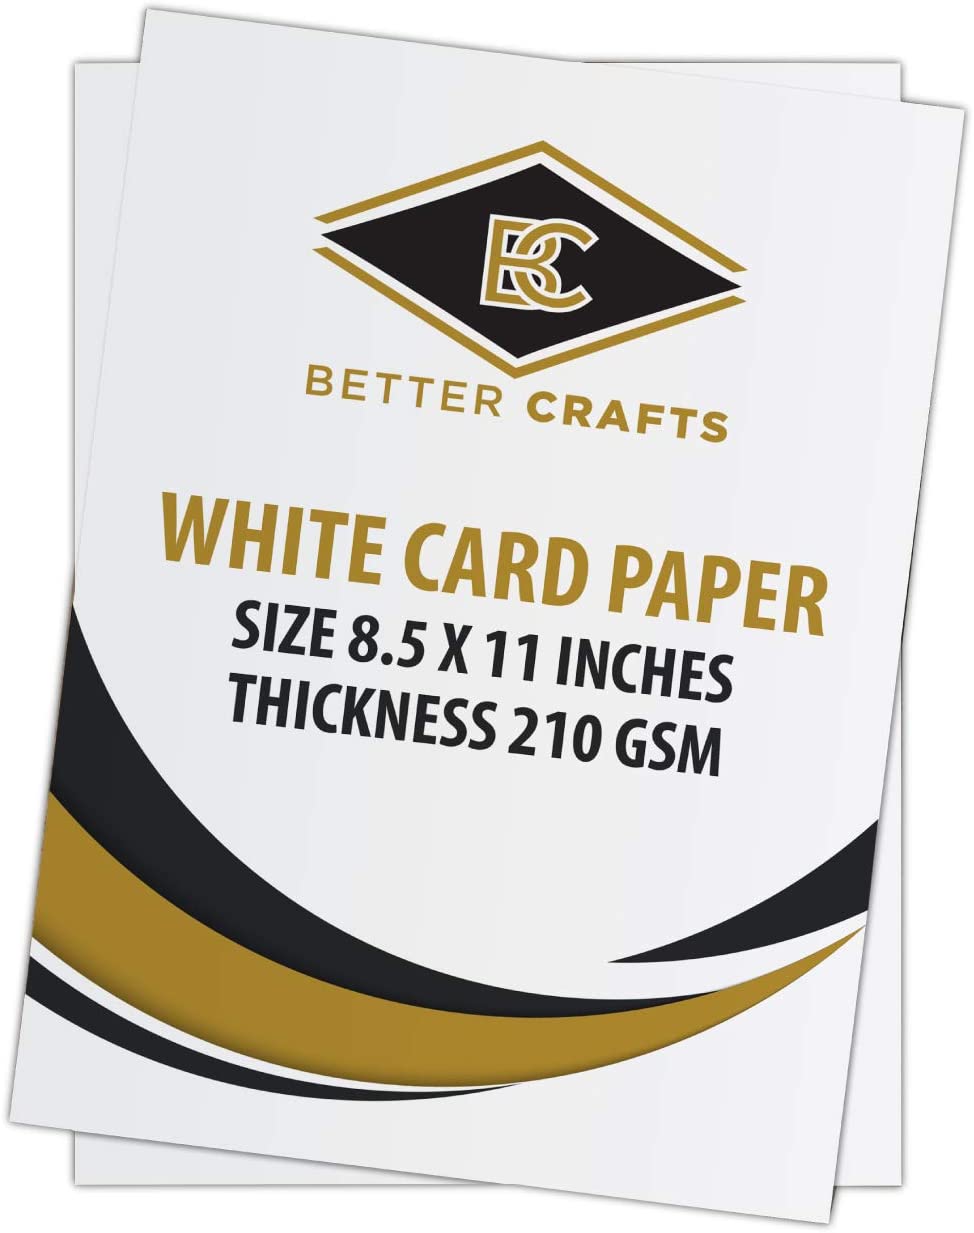 600 Sheets White Card Stock Paper A4 8.3 x 11.7 Inch 250 gsm Craft